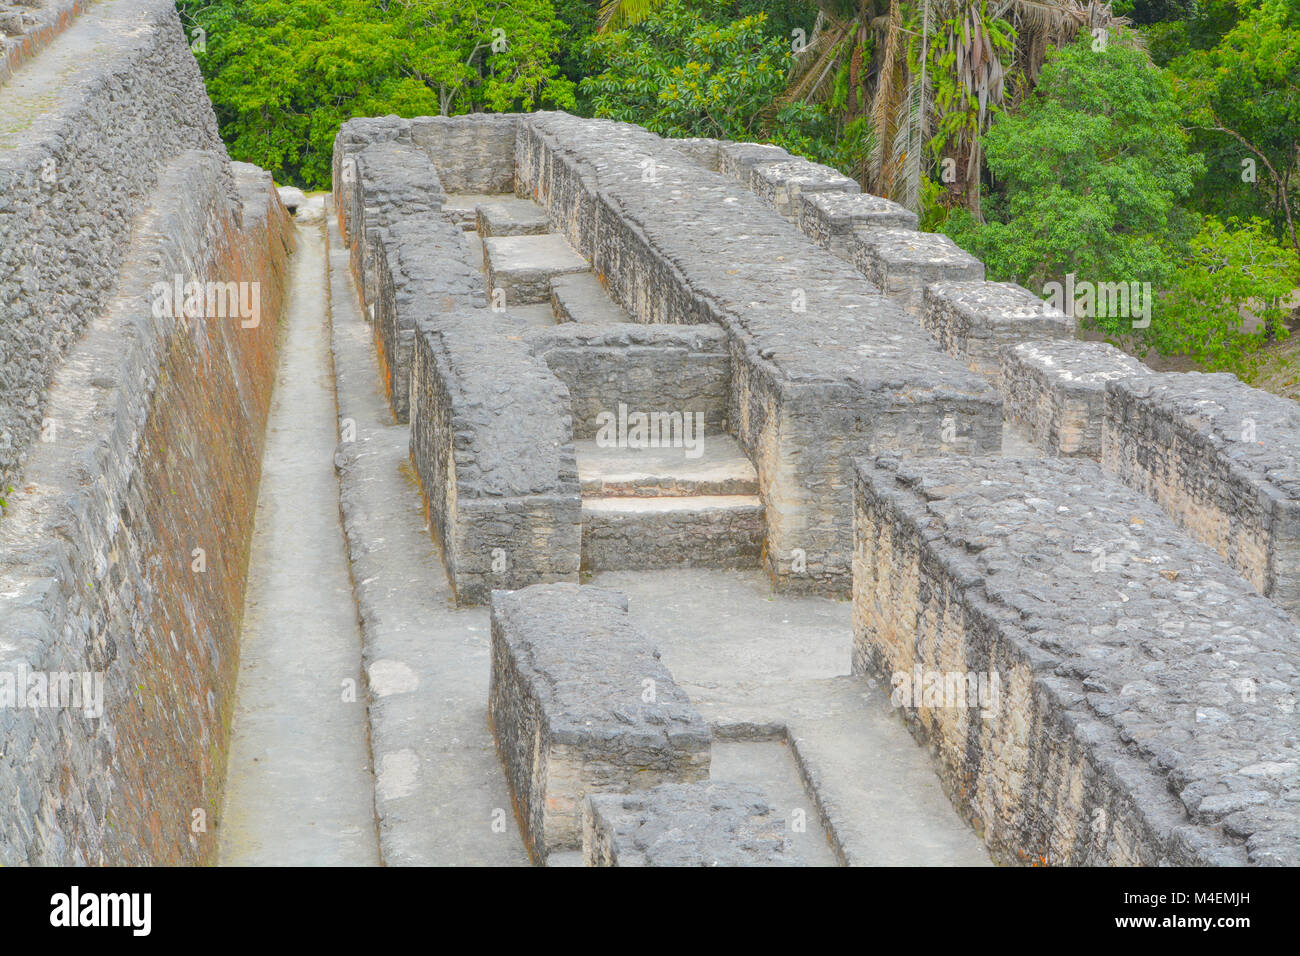 The ancient Mayan ruins at xunantunich archaeological reserve in Belize Stock Photo